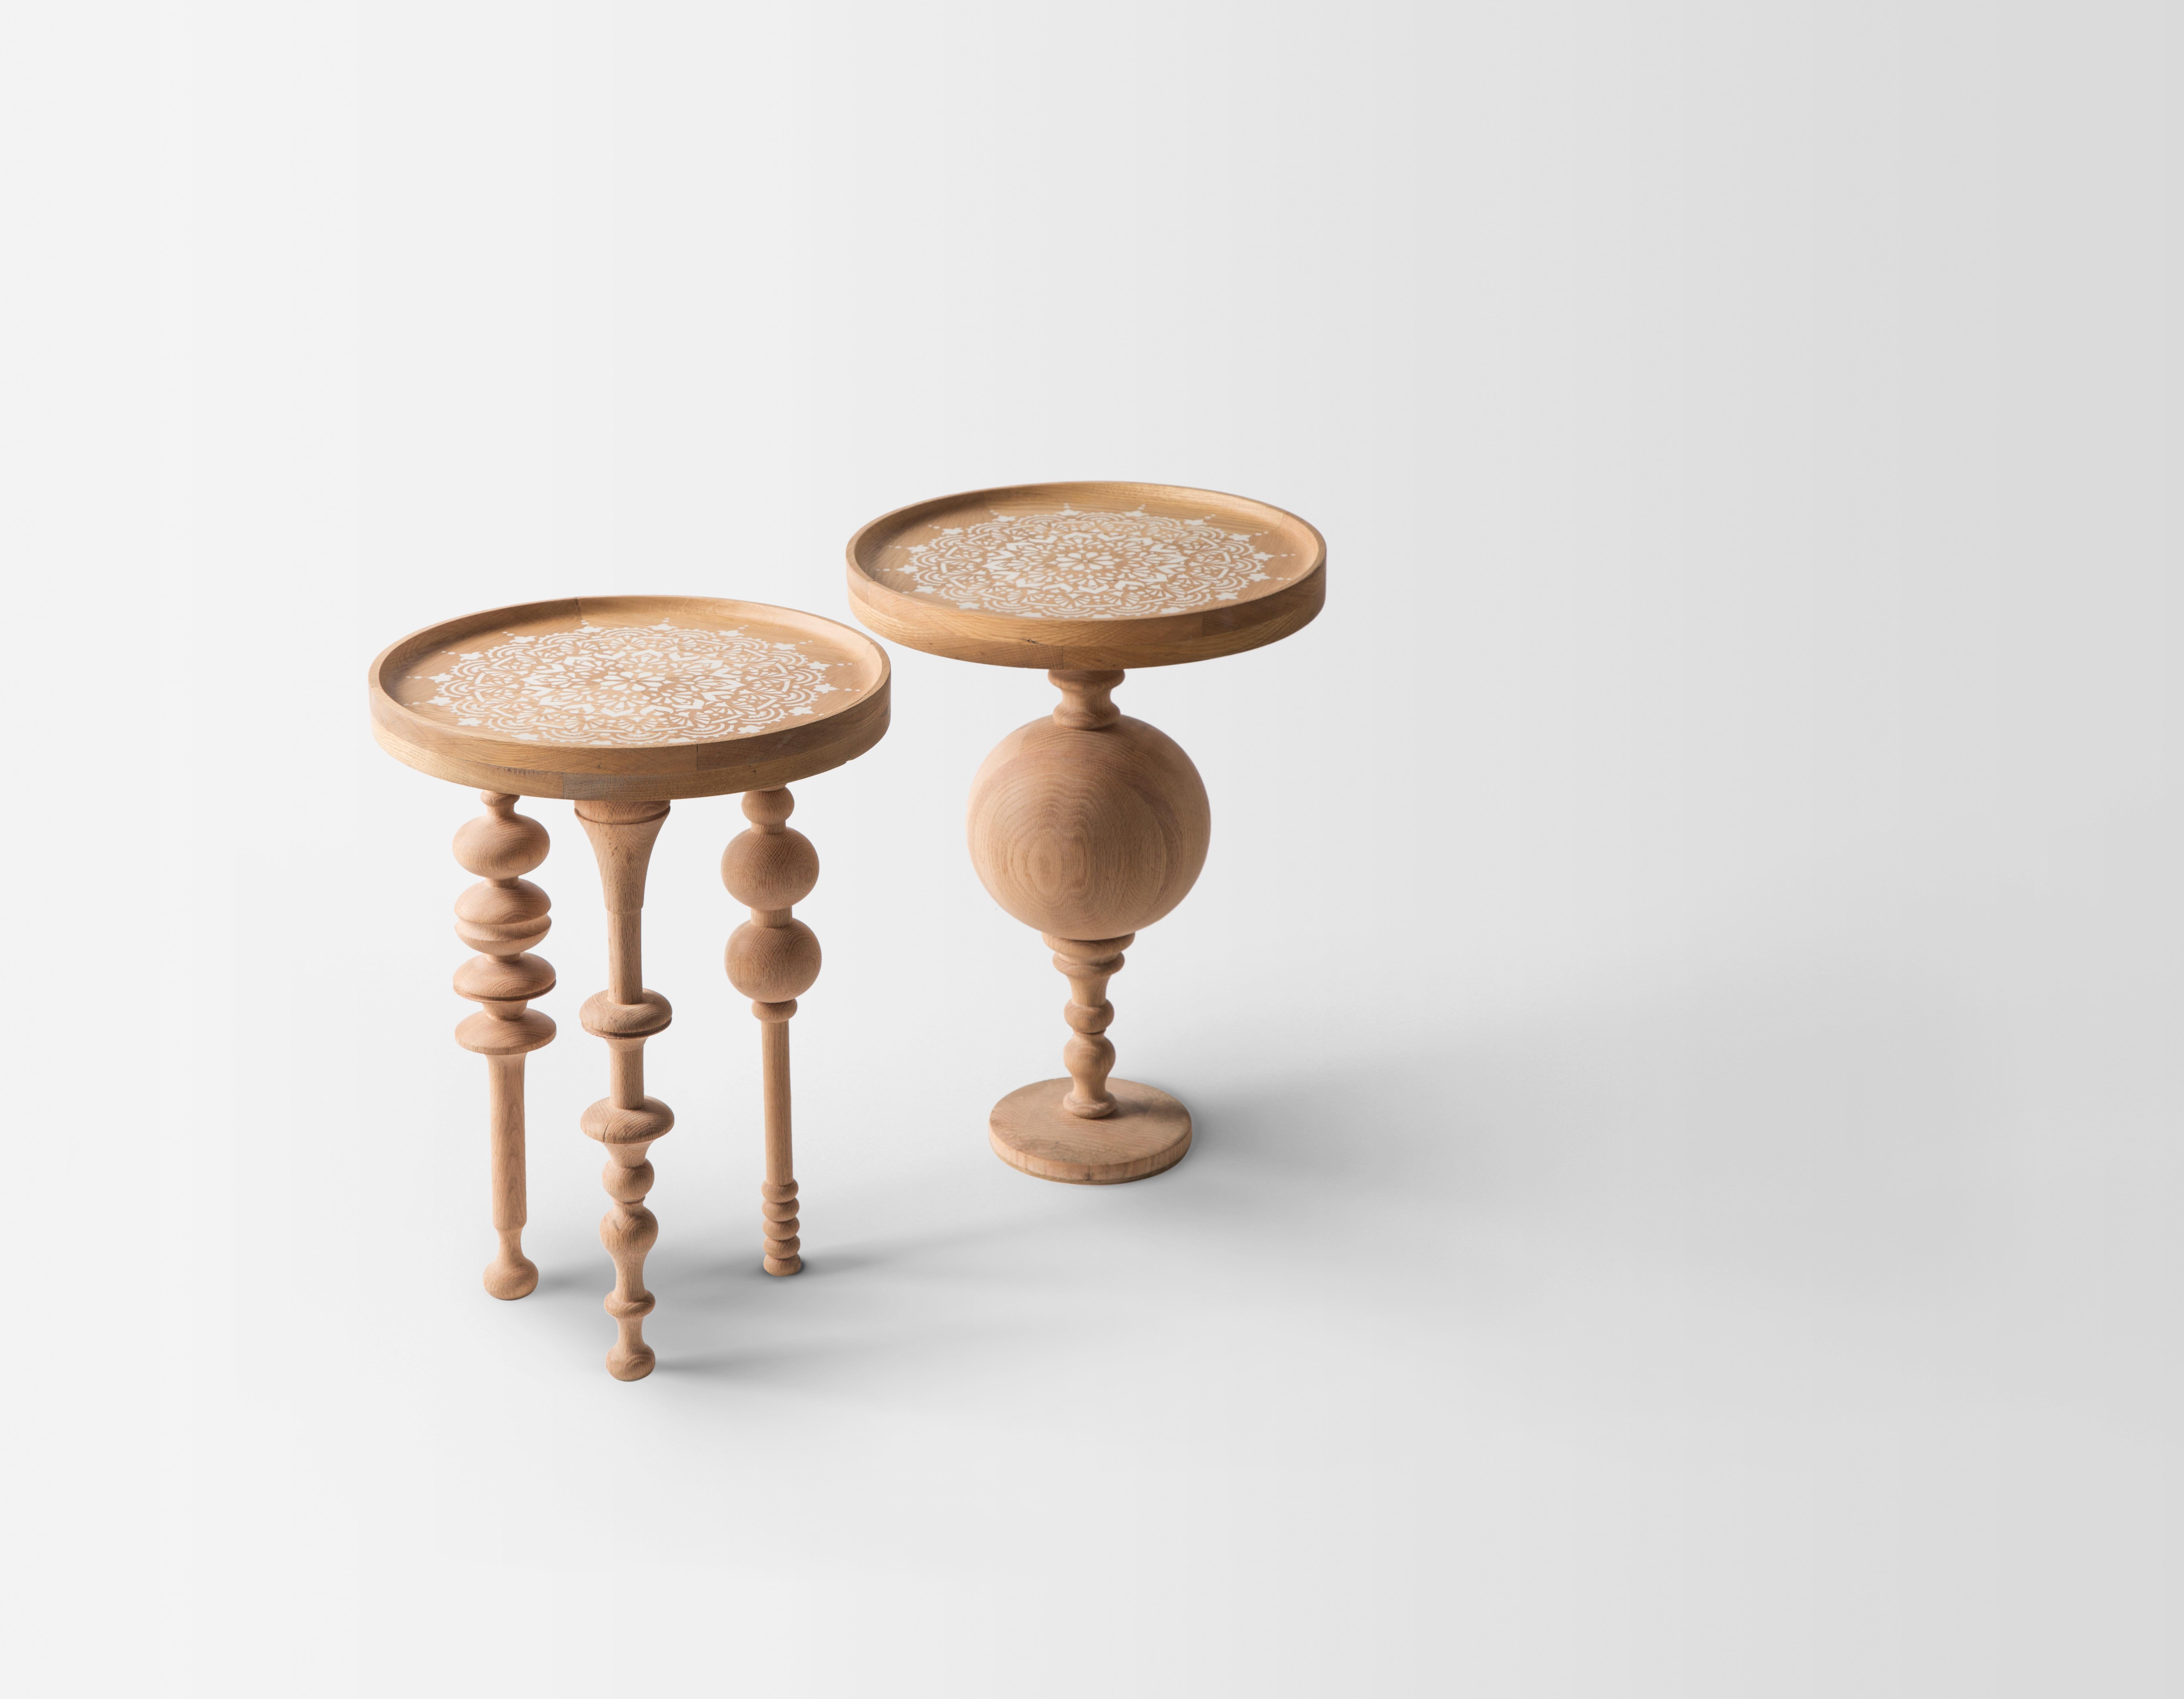 Oak Wood Side Table Set with Arabesque-Inspired Legs and Stenciled Mandala  Motif For Sale at 1stDibs